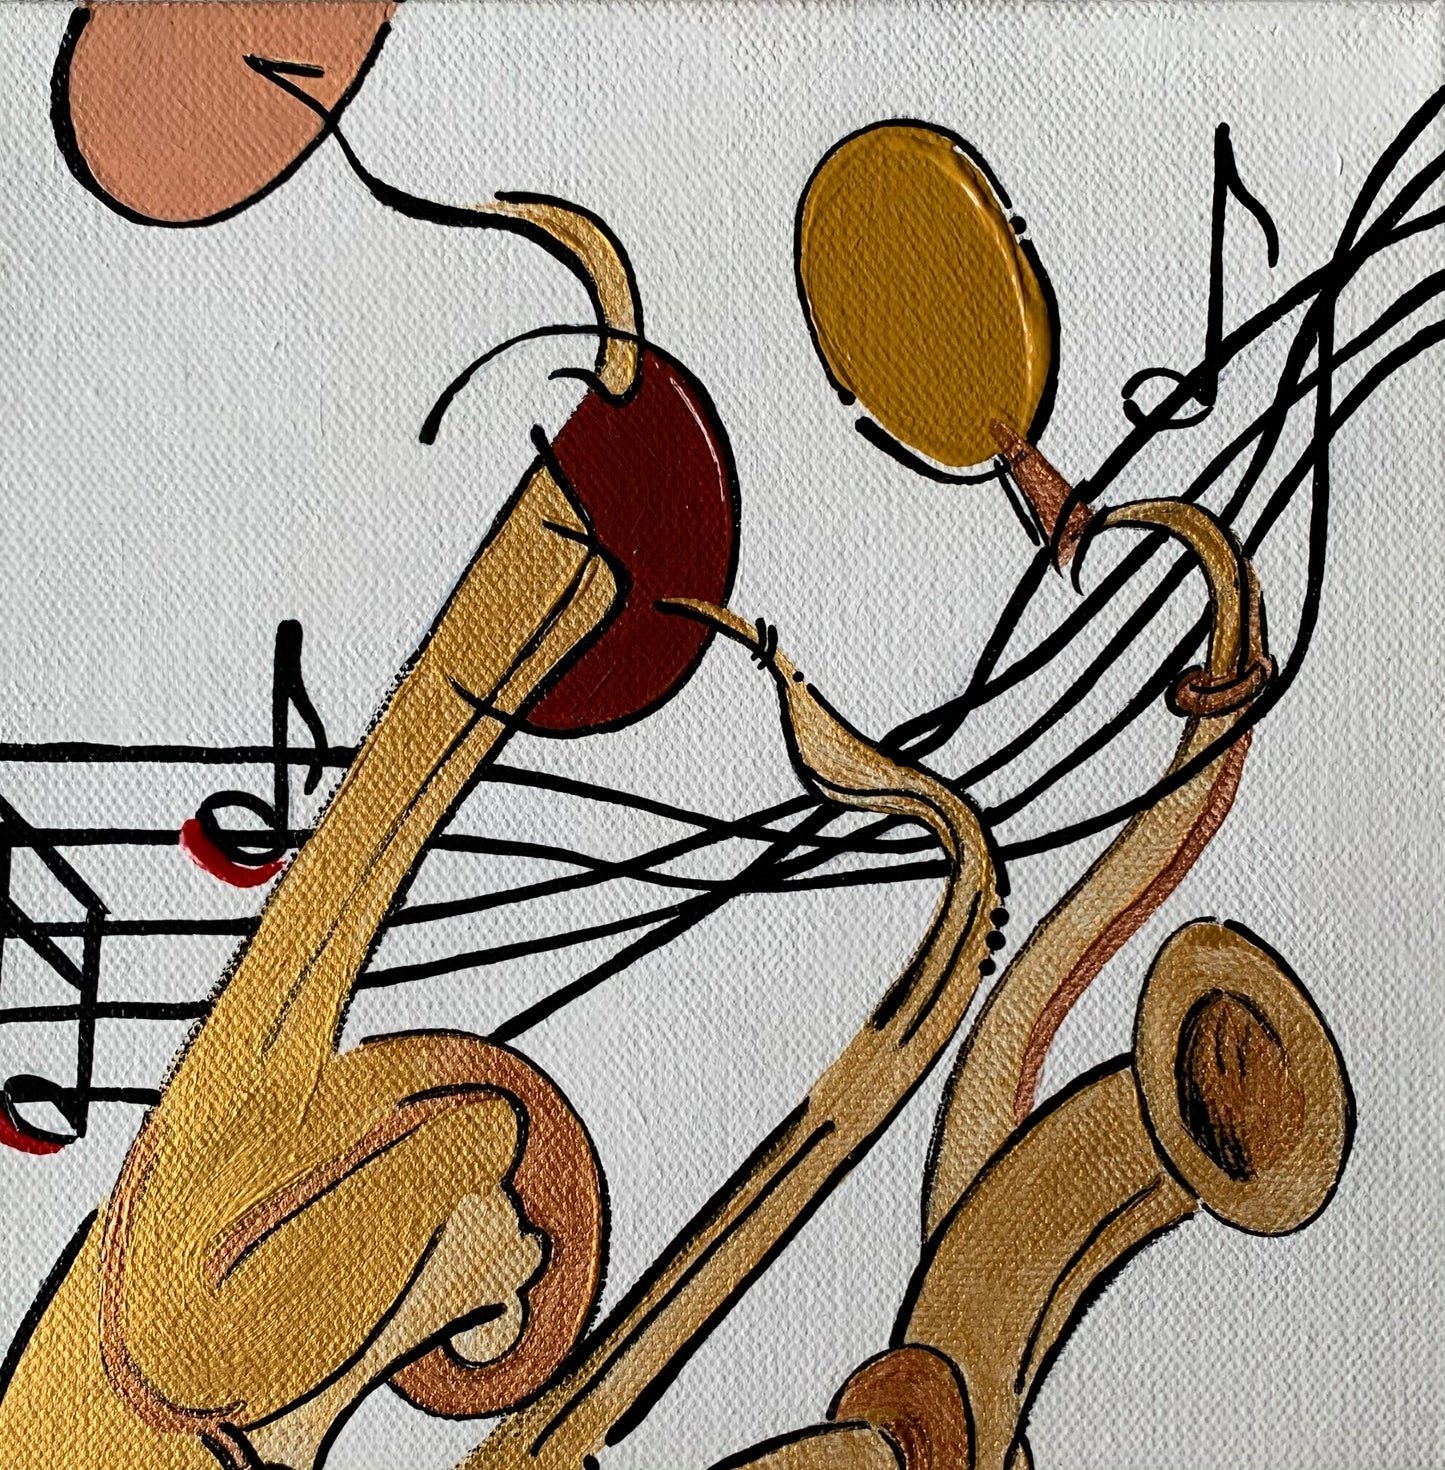 Bits 'n Pieces on Canvas Series | Saxuality